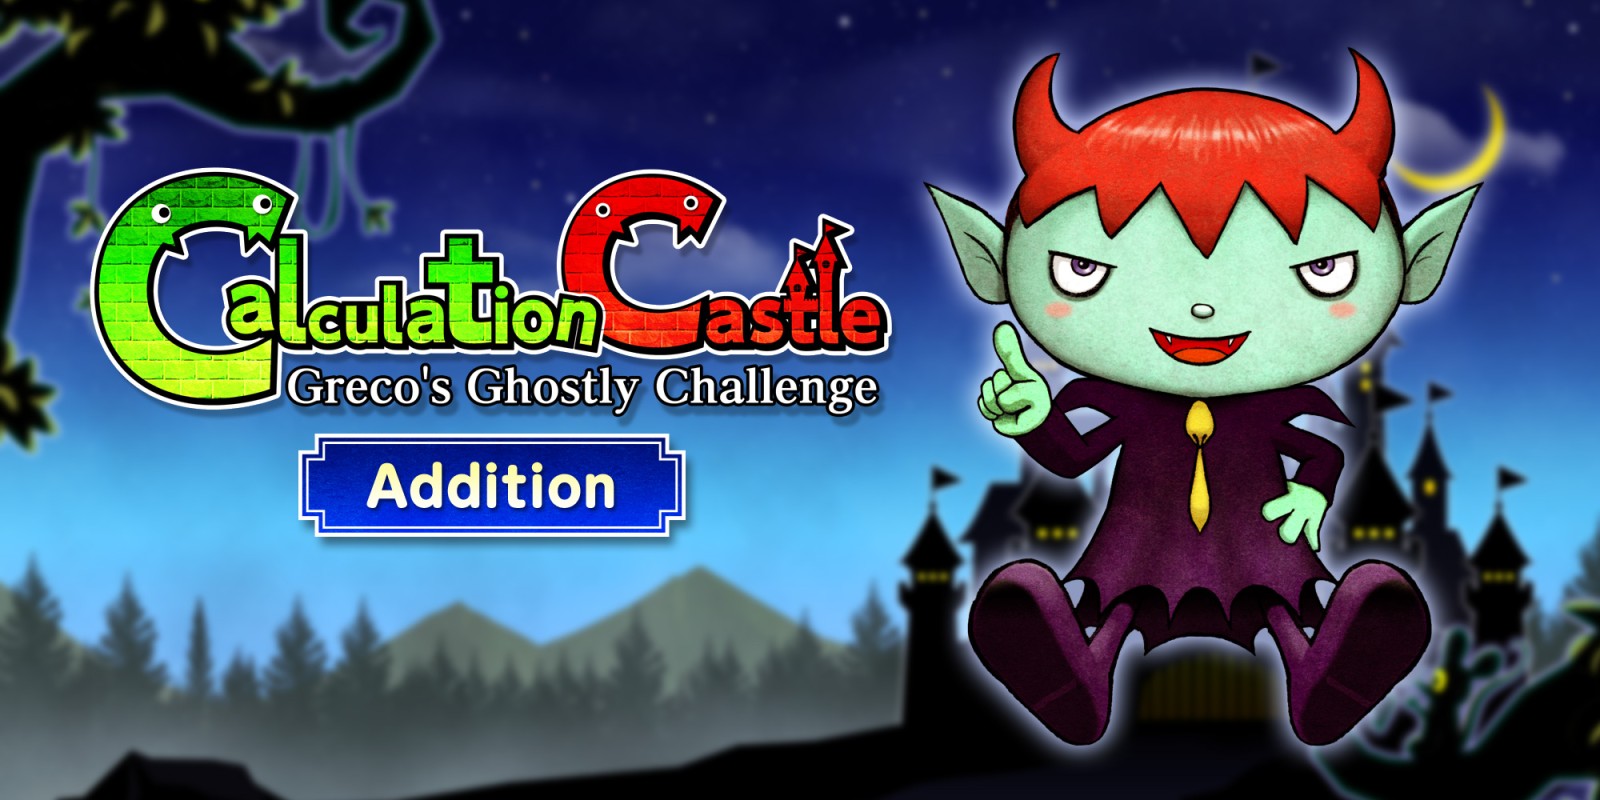 Calculation Castle : Greco's Ghostly Challenge "Addition"